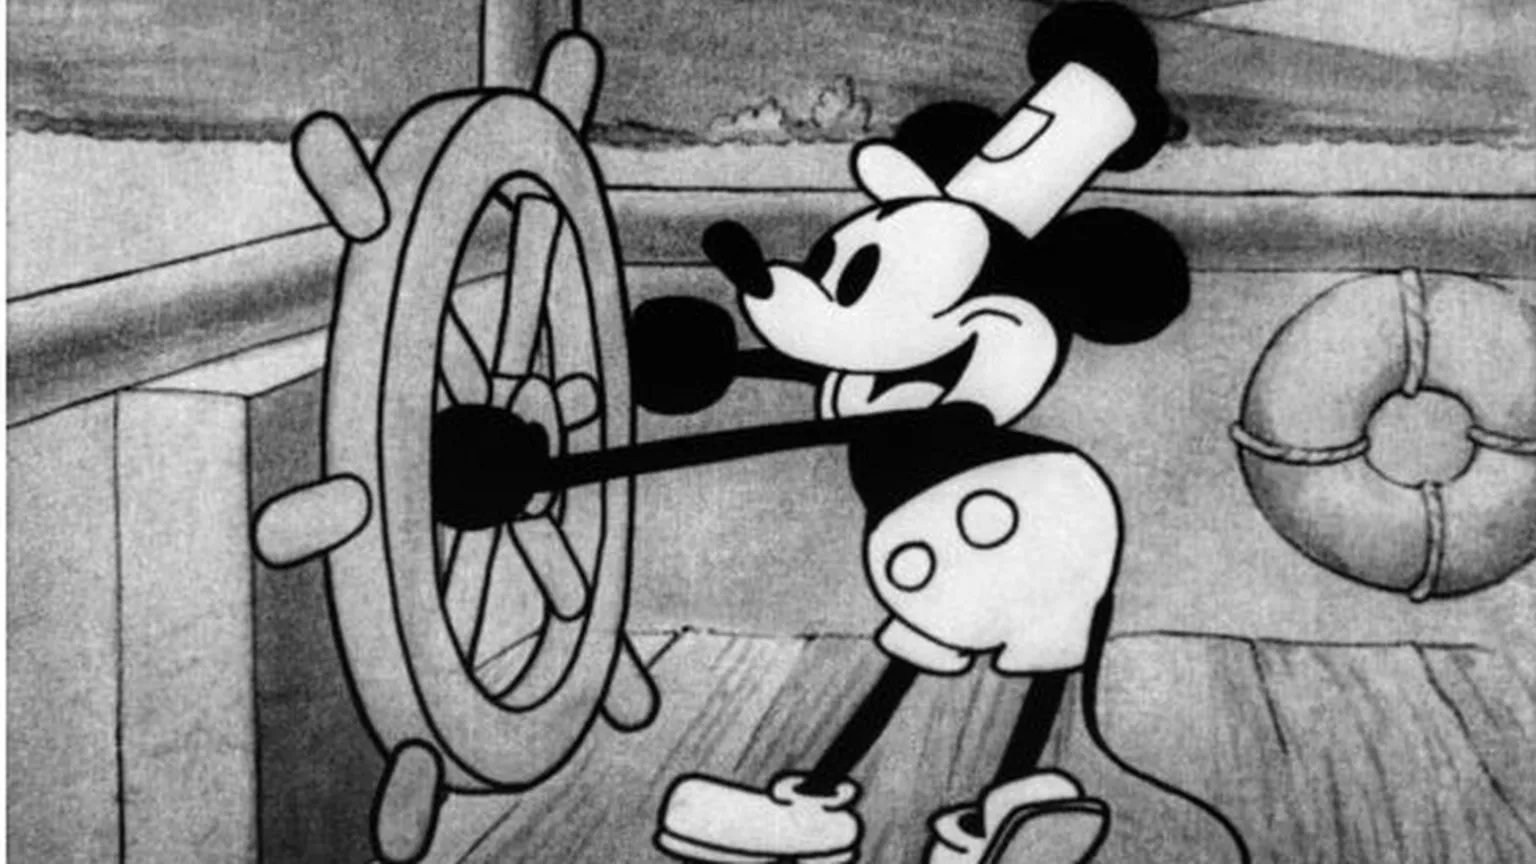 Disney’s earliest Mickey and Minnie Mouse enter public domain as US copyright expires (bbc.com)